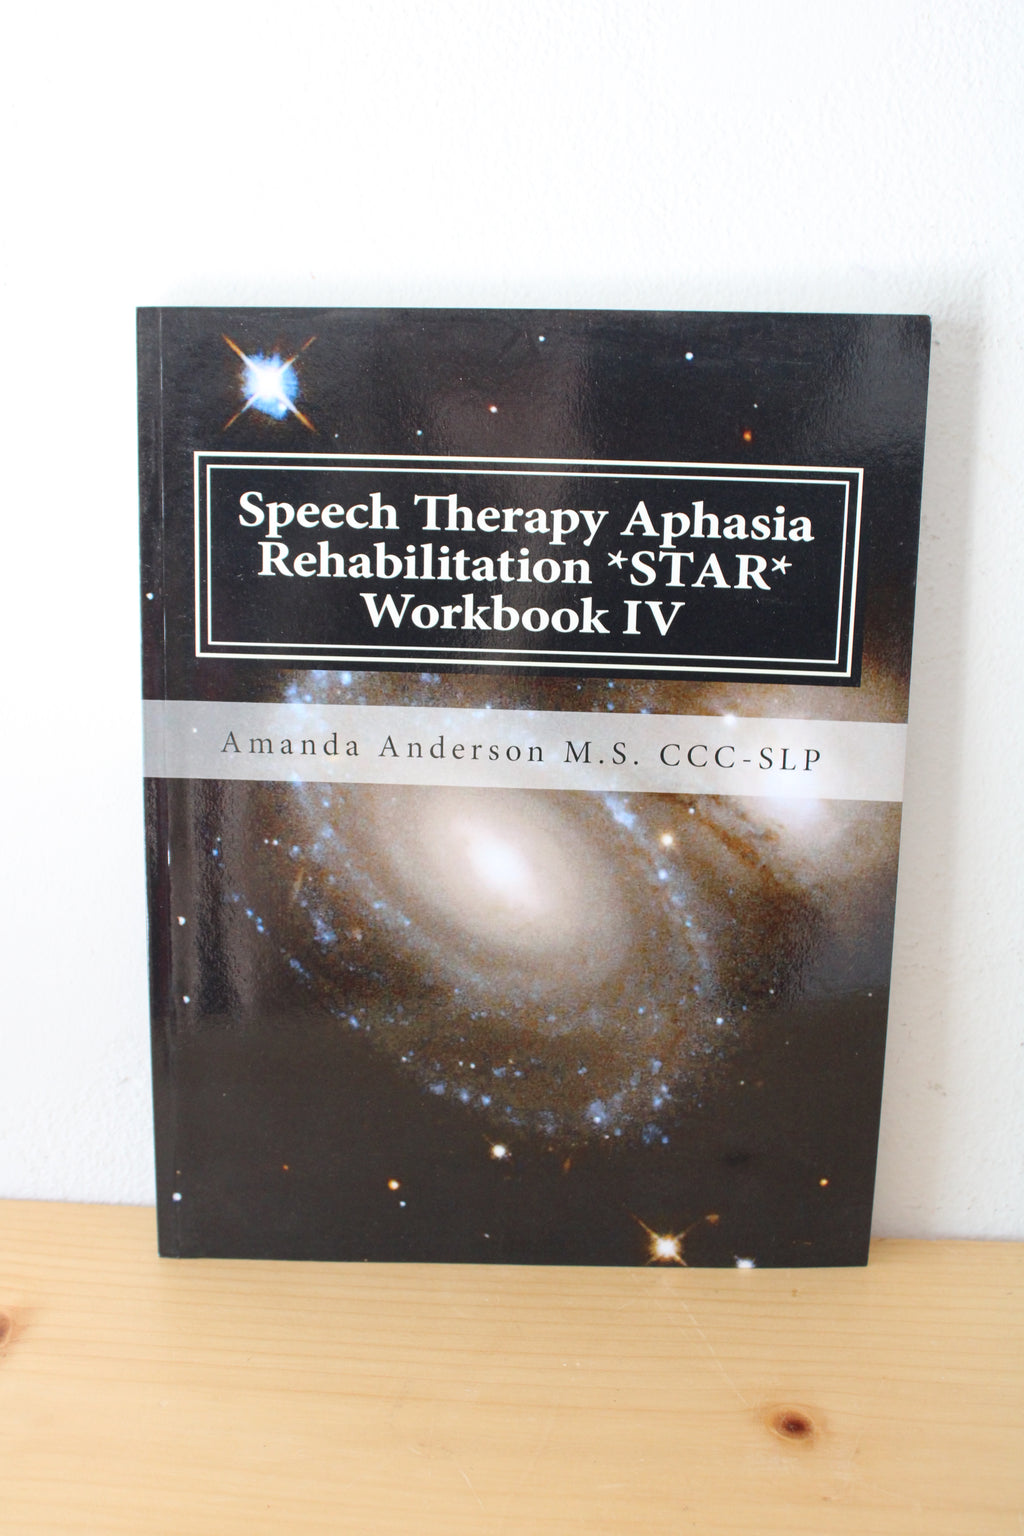 Speech Therapy Aphasia Rehabilitation STAR Workbook IV By Amanda Anderson M.S. CCC-SLP